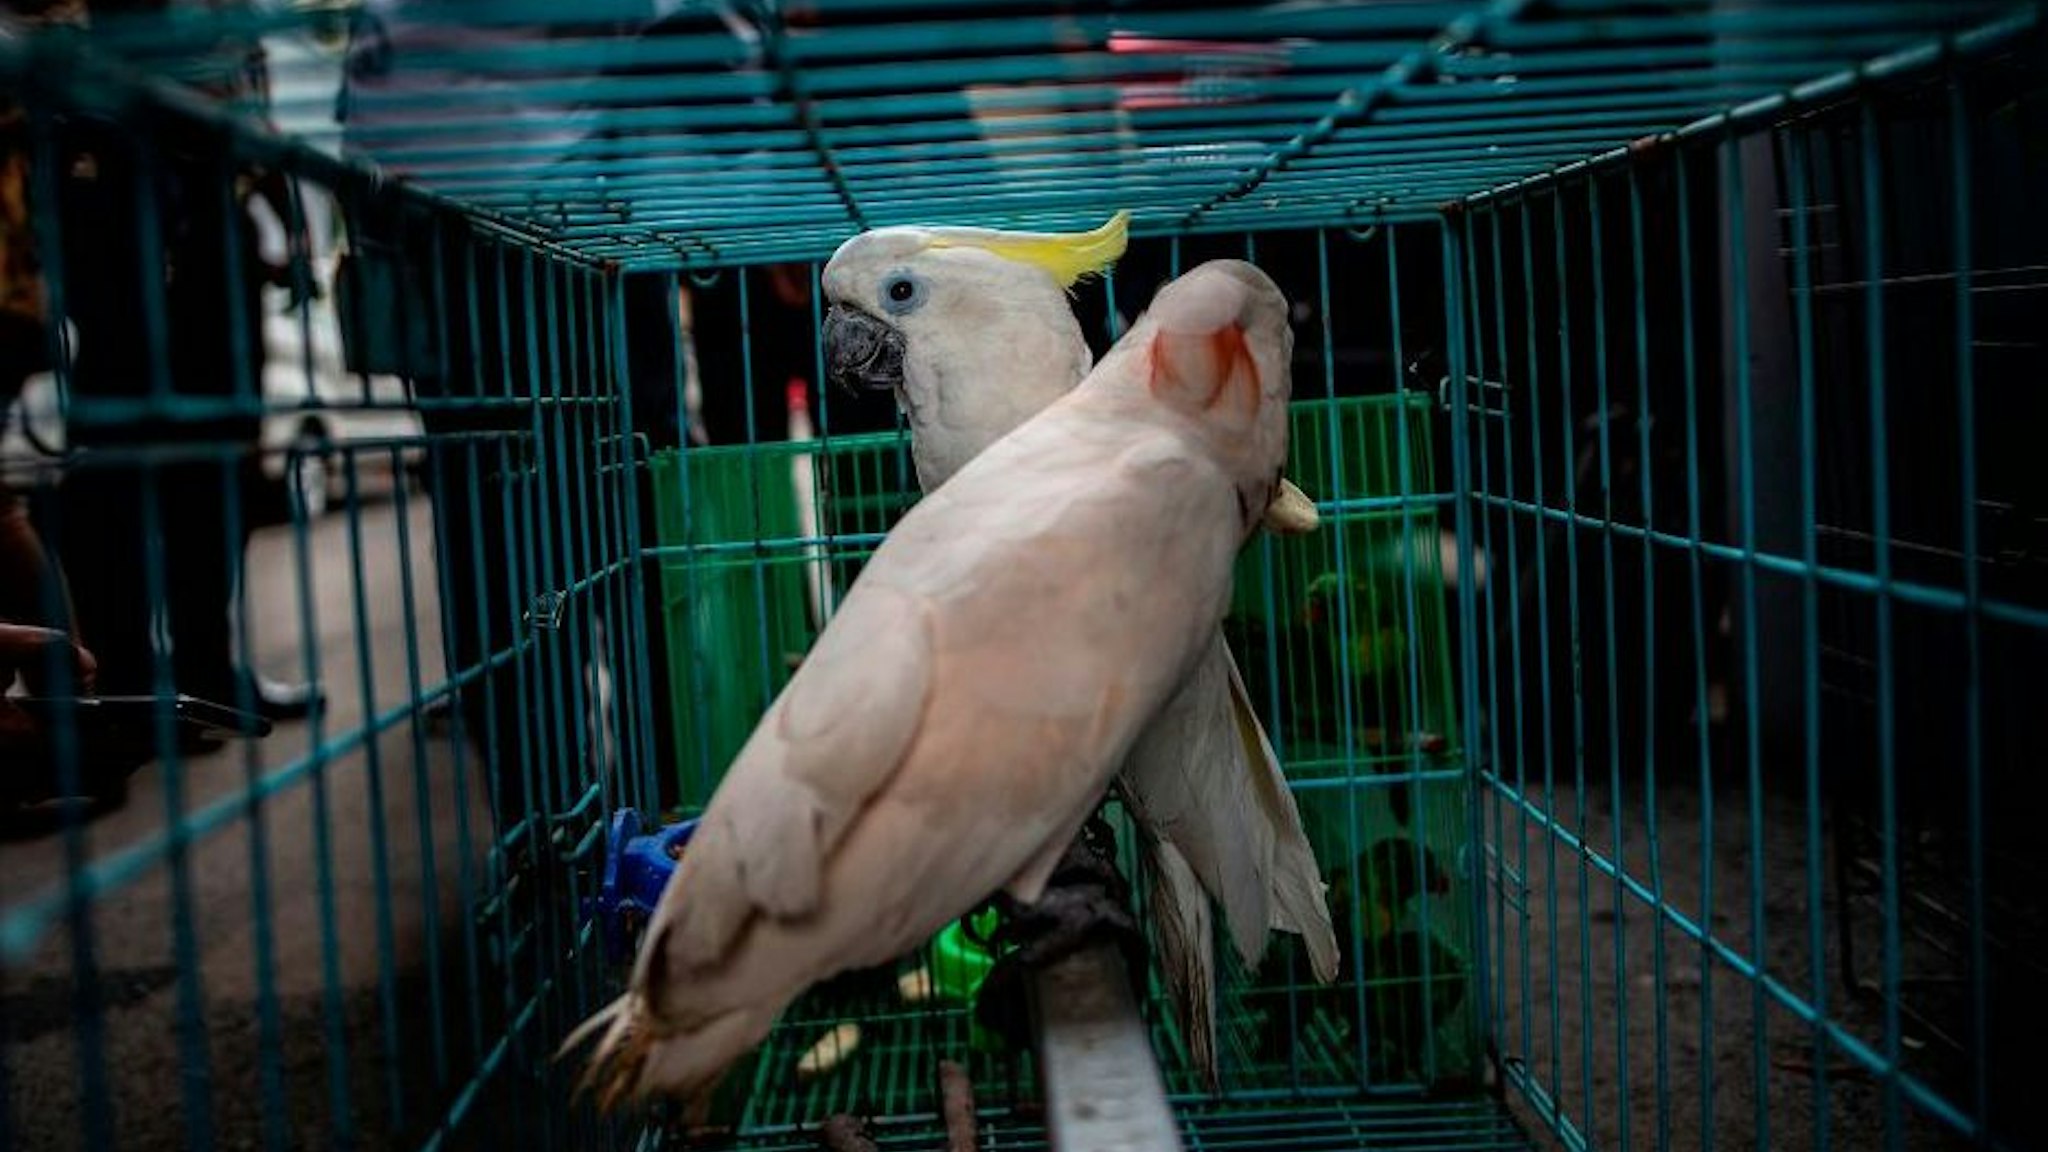 Cockatoo parrots, seized by authorities during an anti-smuggling operation, are seen in a cage during a press conference in Surabaya on March 27, 2019. - Indonesian authorities said March 27 they had seized five komodo dragons and dozens of other animals being sold on Facebook, as the country battles to clamp down on the illegal wildlife trade. (Photo by Juni Kriswanto / AFP) (Photo credit should read JUNI KRISWANTO/AFP via Getty Images)